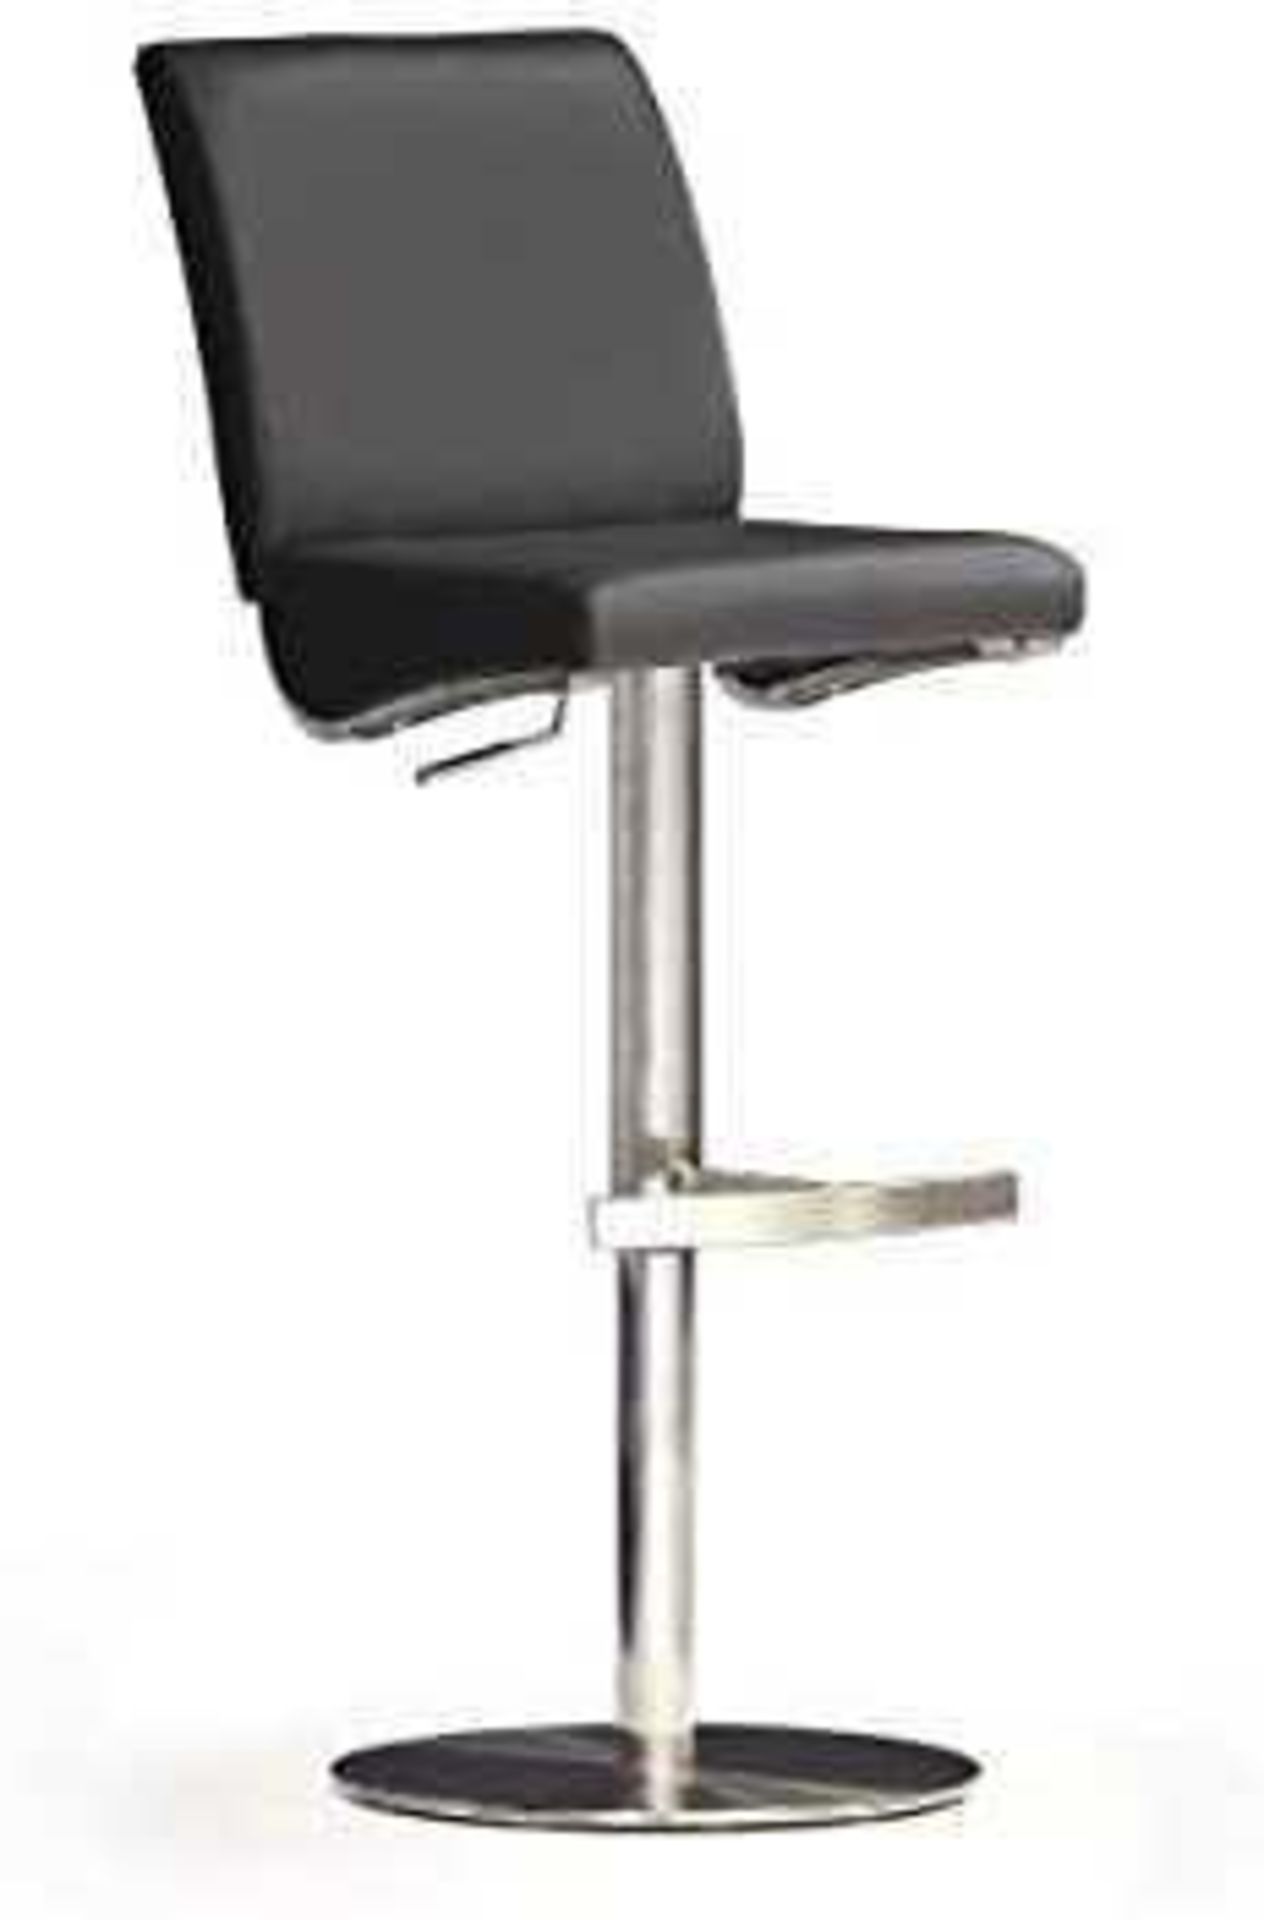 RRP £100 Boxed New Diaz' Barstool In Black Faux Leather With Chrome Base